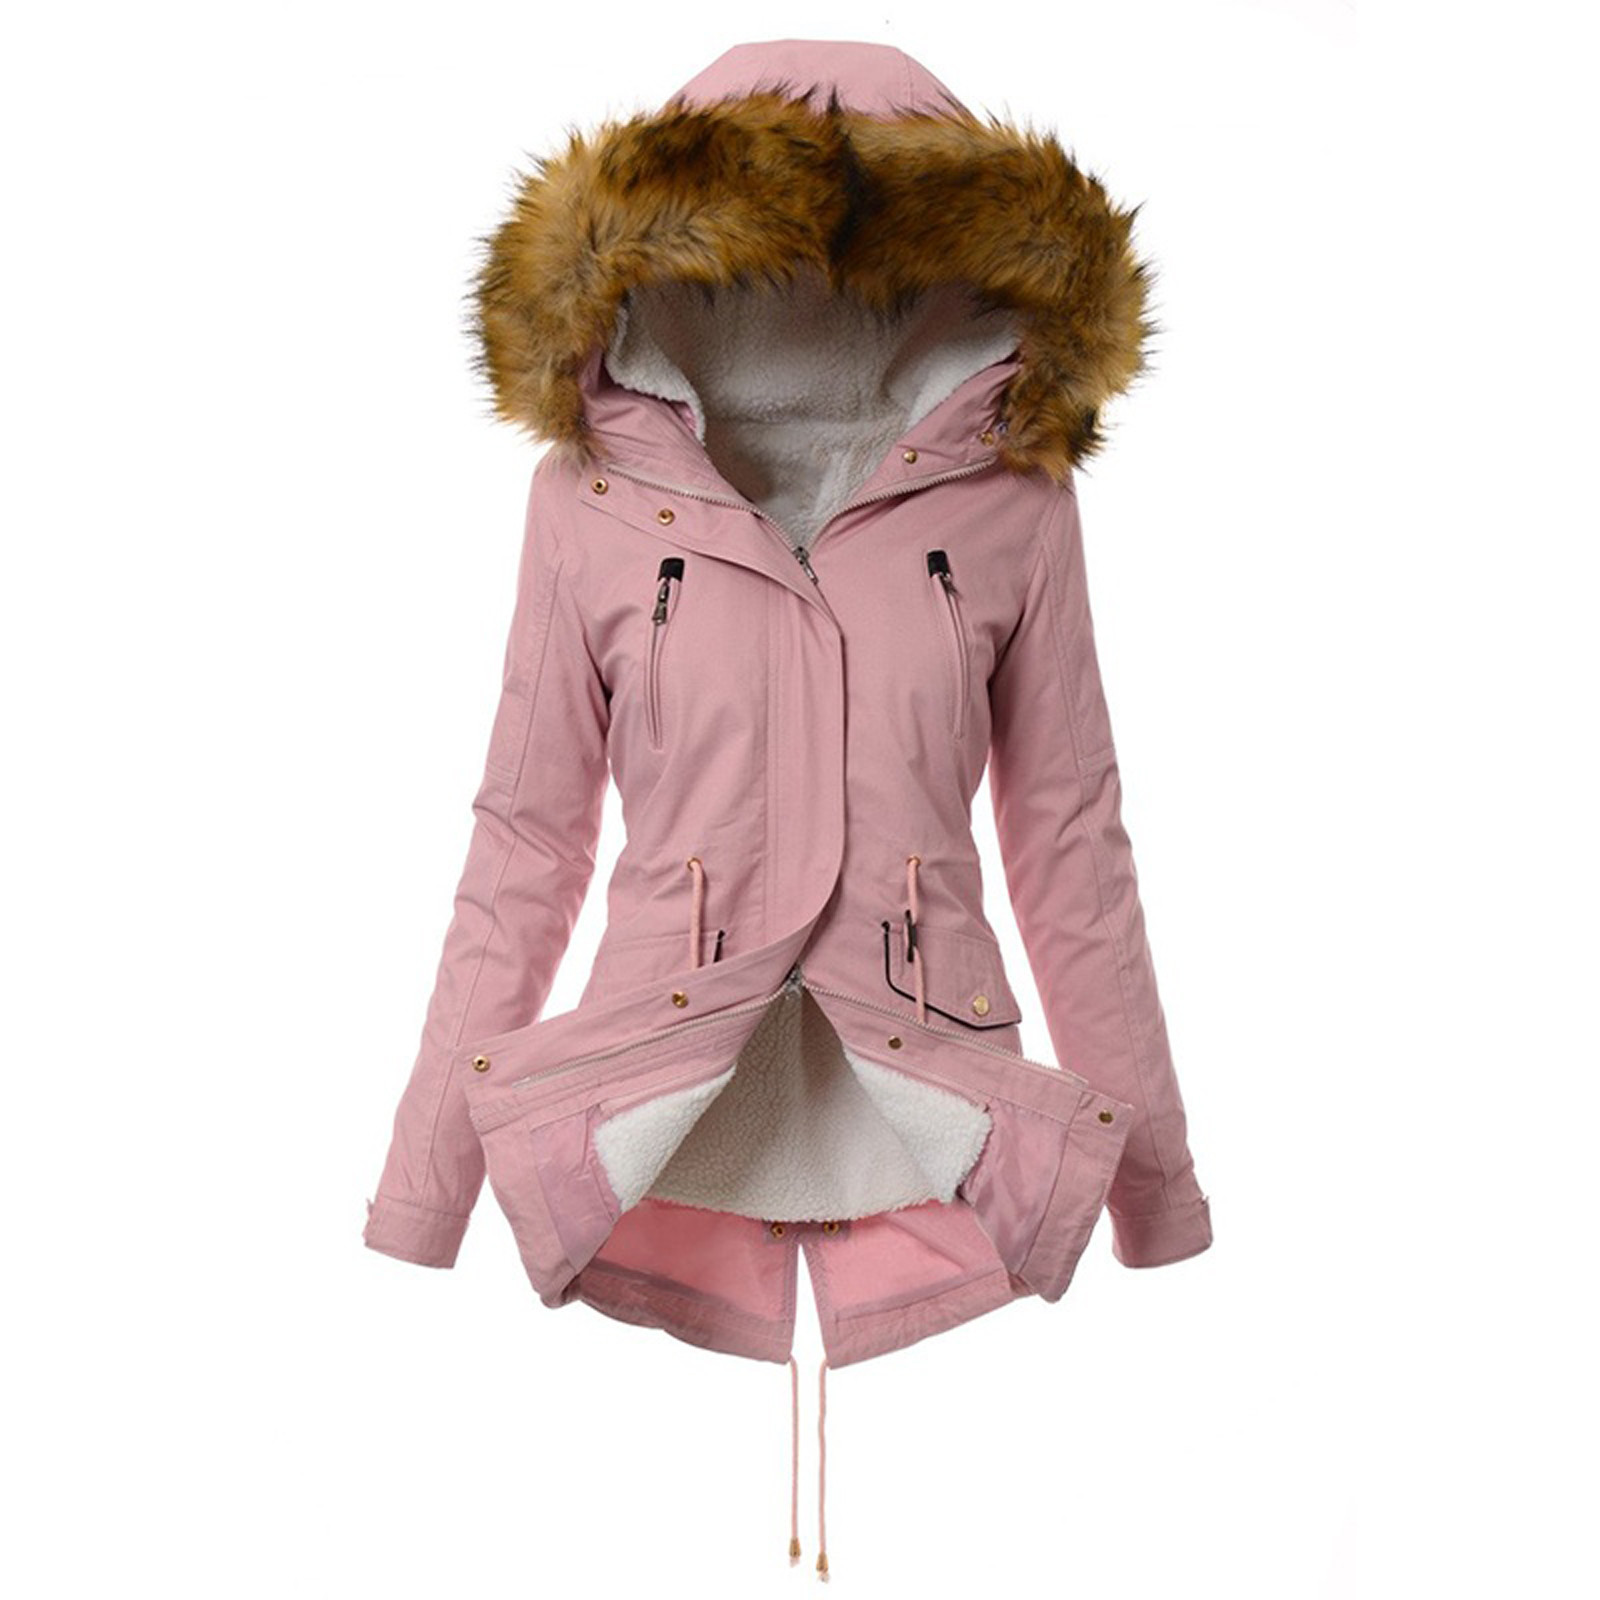 Lanhui Women's Warm Coat Jacket Outwear Fur' Lined Trench Winter Hooded Thick Overcoat - image 3 of 5